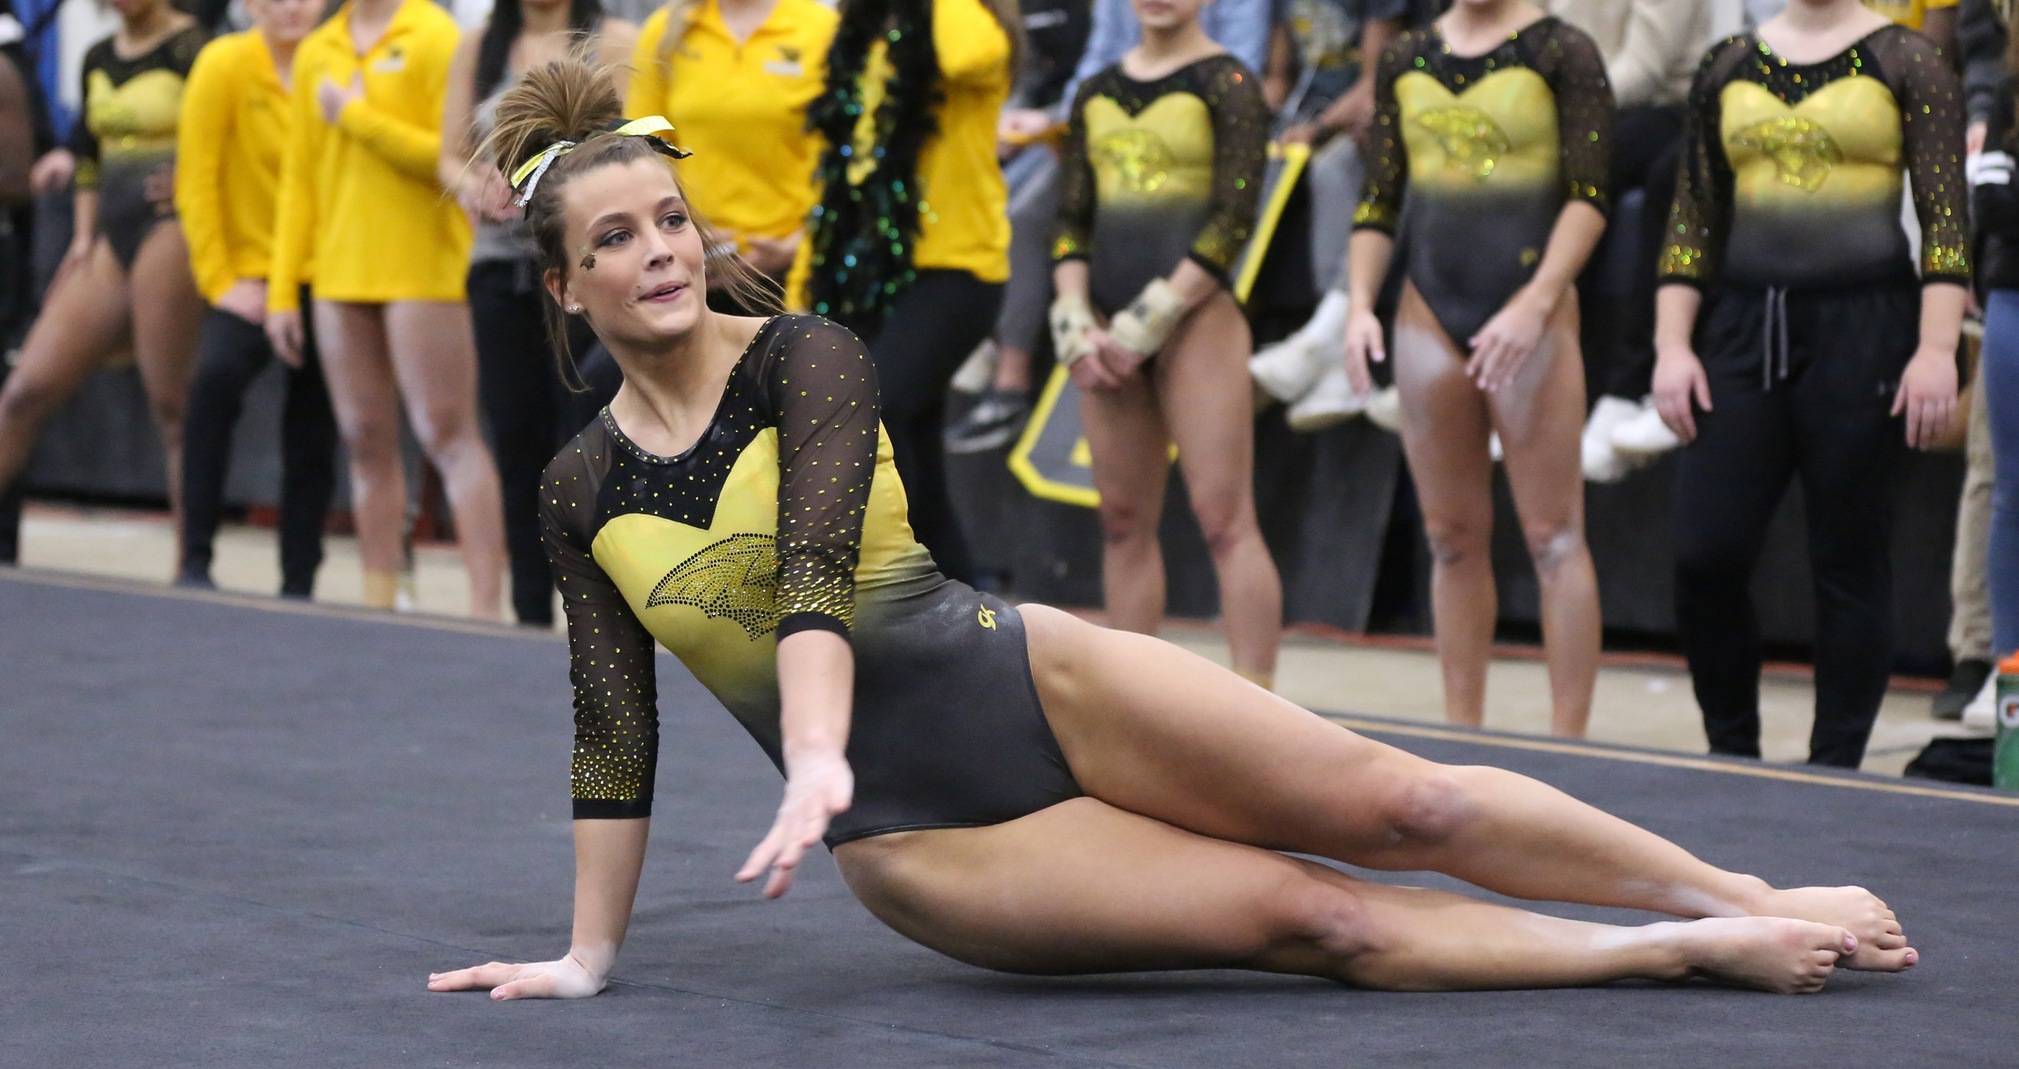 Bailey Finin took first place in the floor exercise with a season-best score of 9.675.